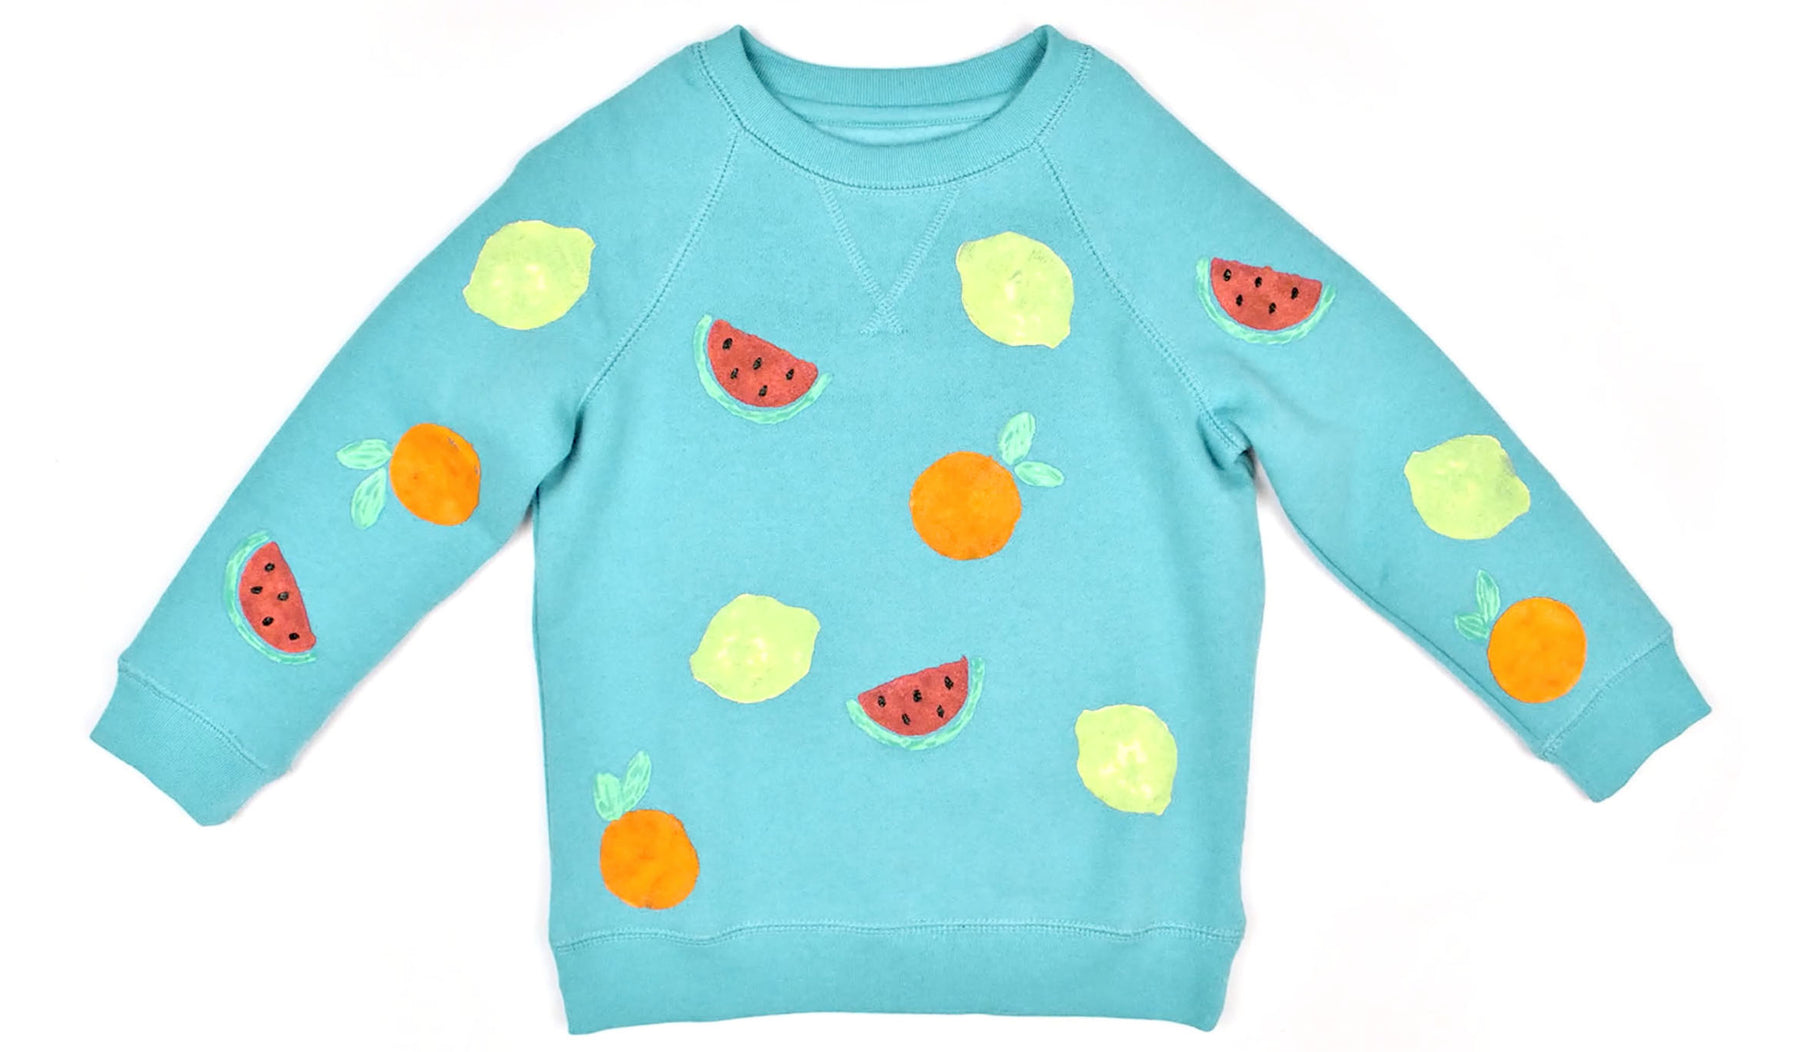 blue sweatshirt with DIY painted fruit shapes 